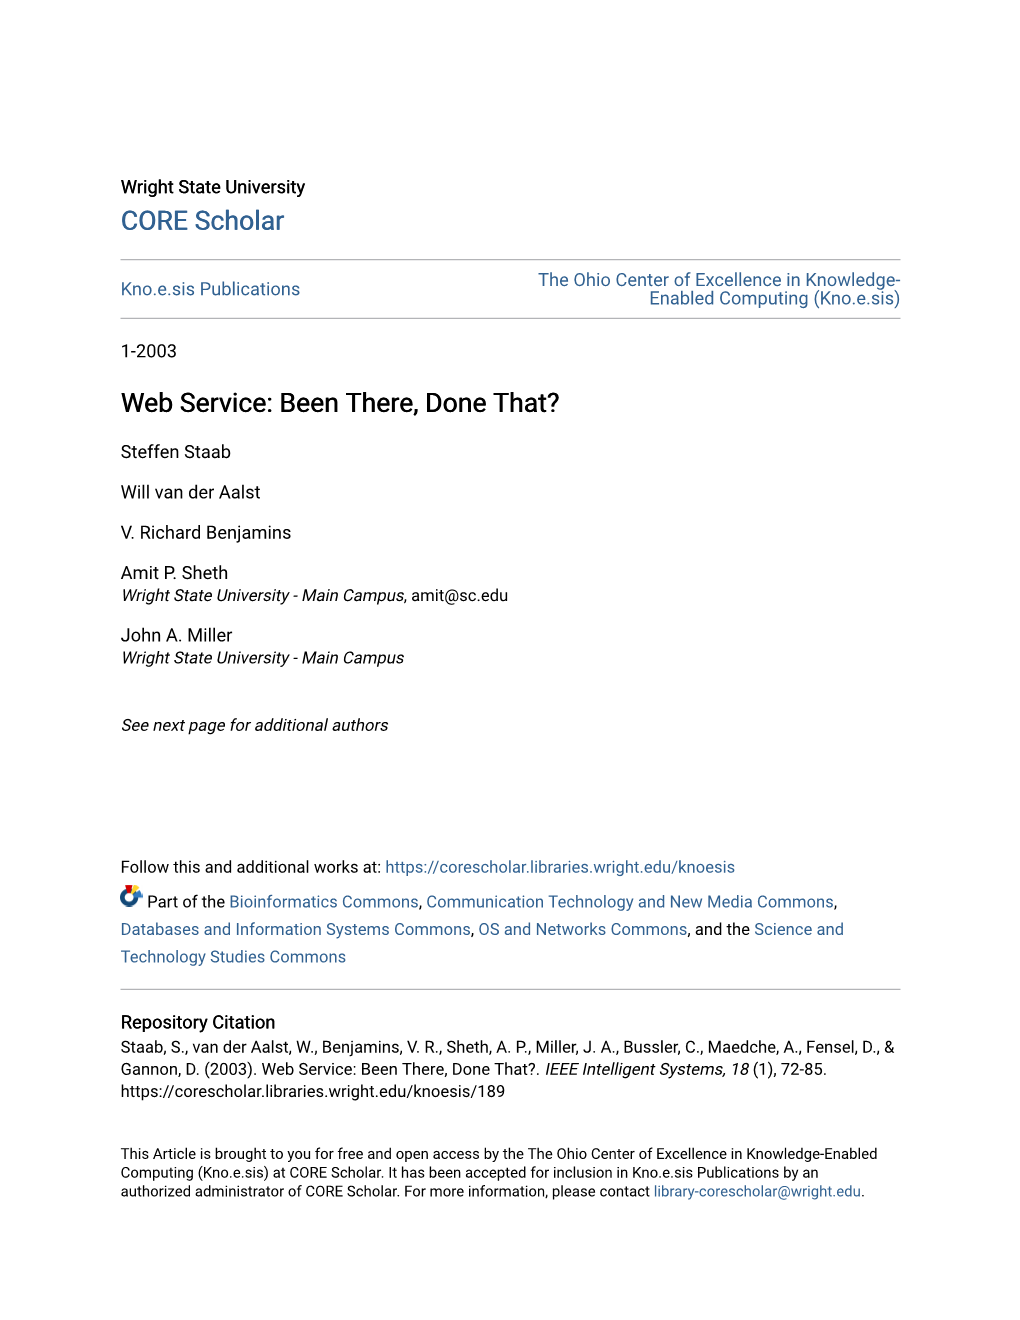 Web Service: Been There, Done That?